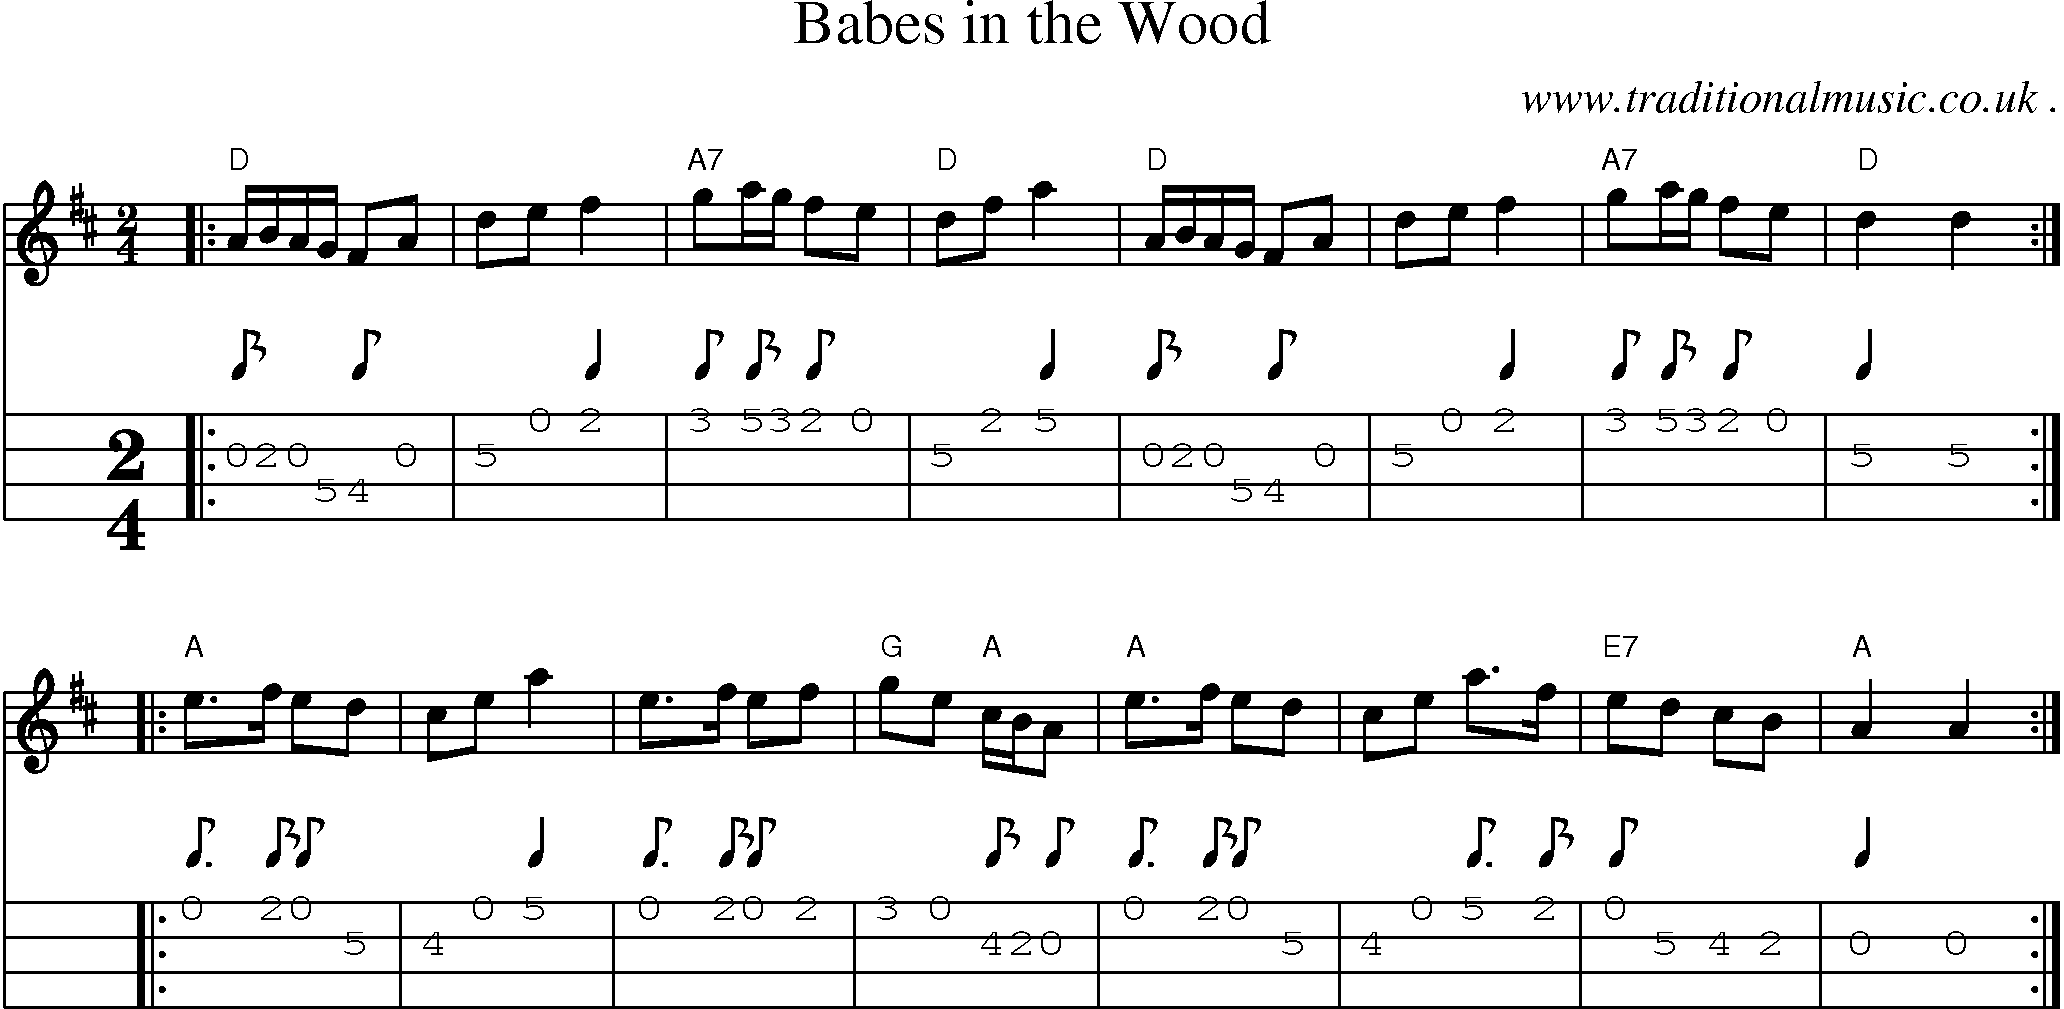 Sheet-music  score, Chords and Mandolin Tabs for Babes In The Wood